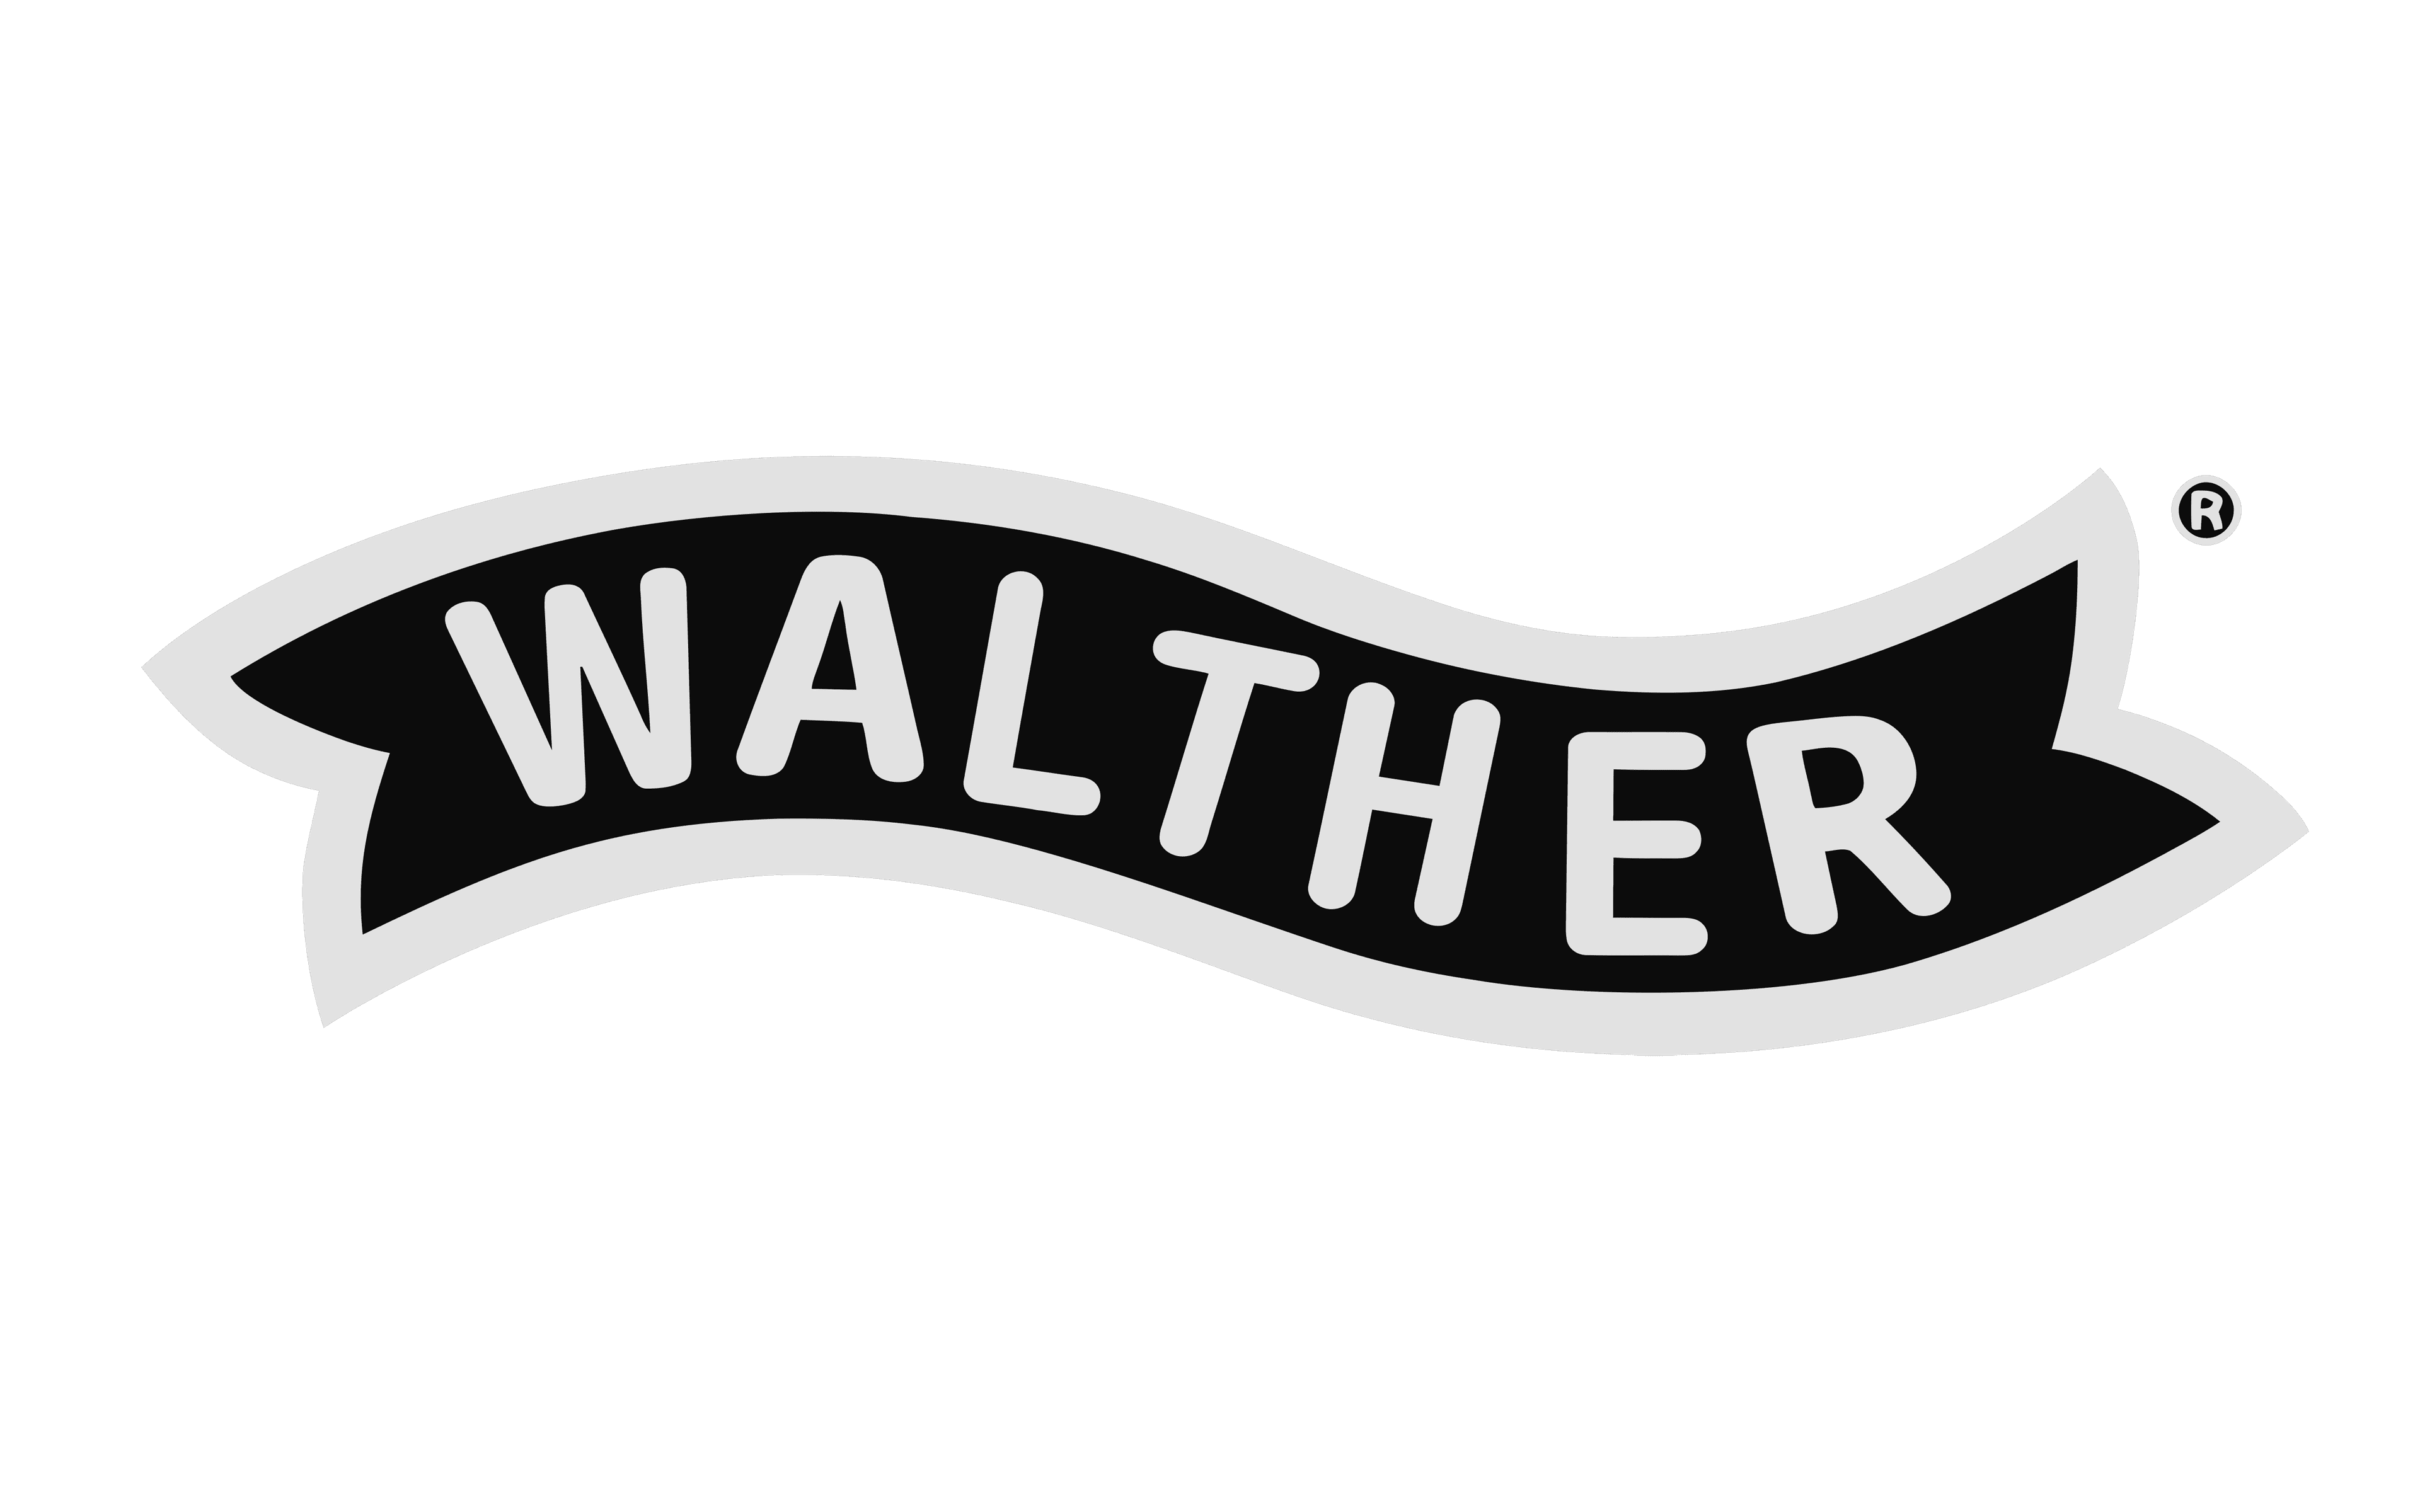 Walther logo and symbol, meaning, history, PNG